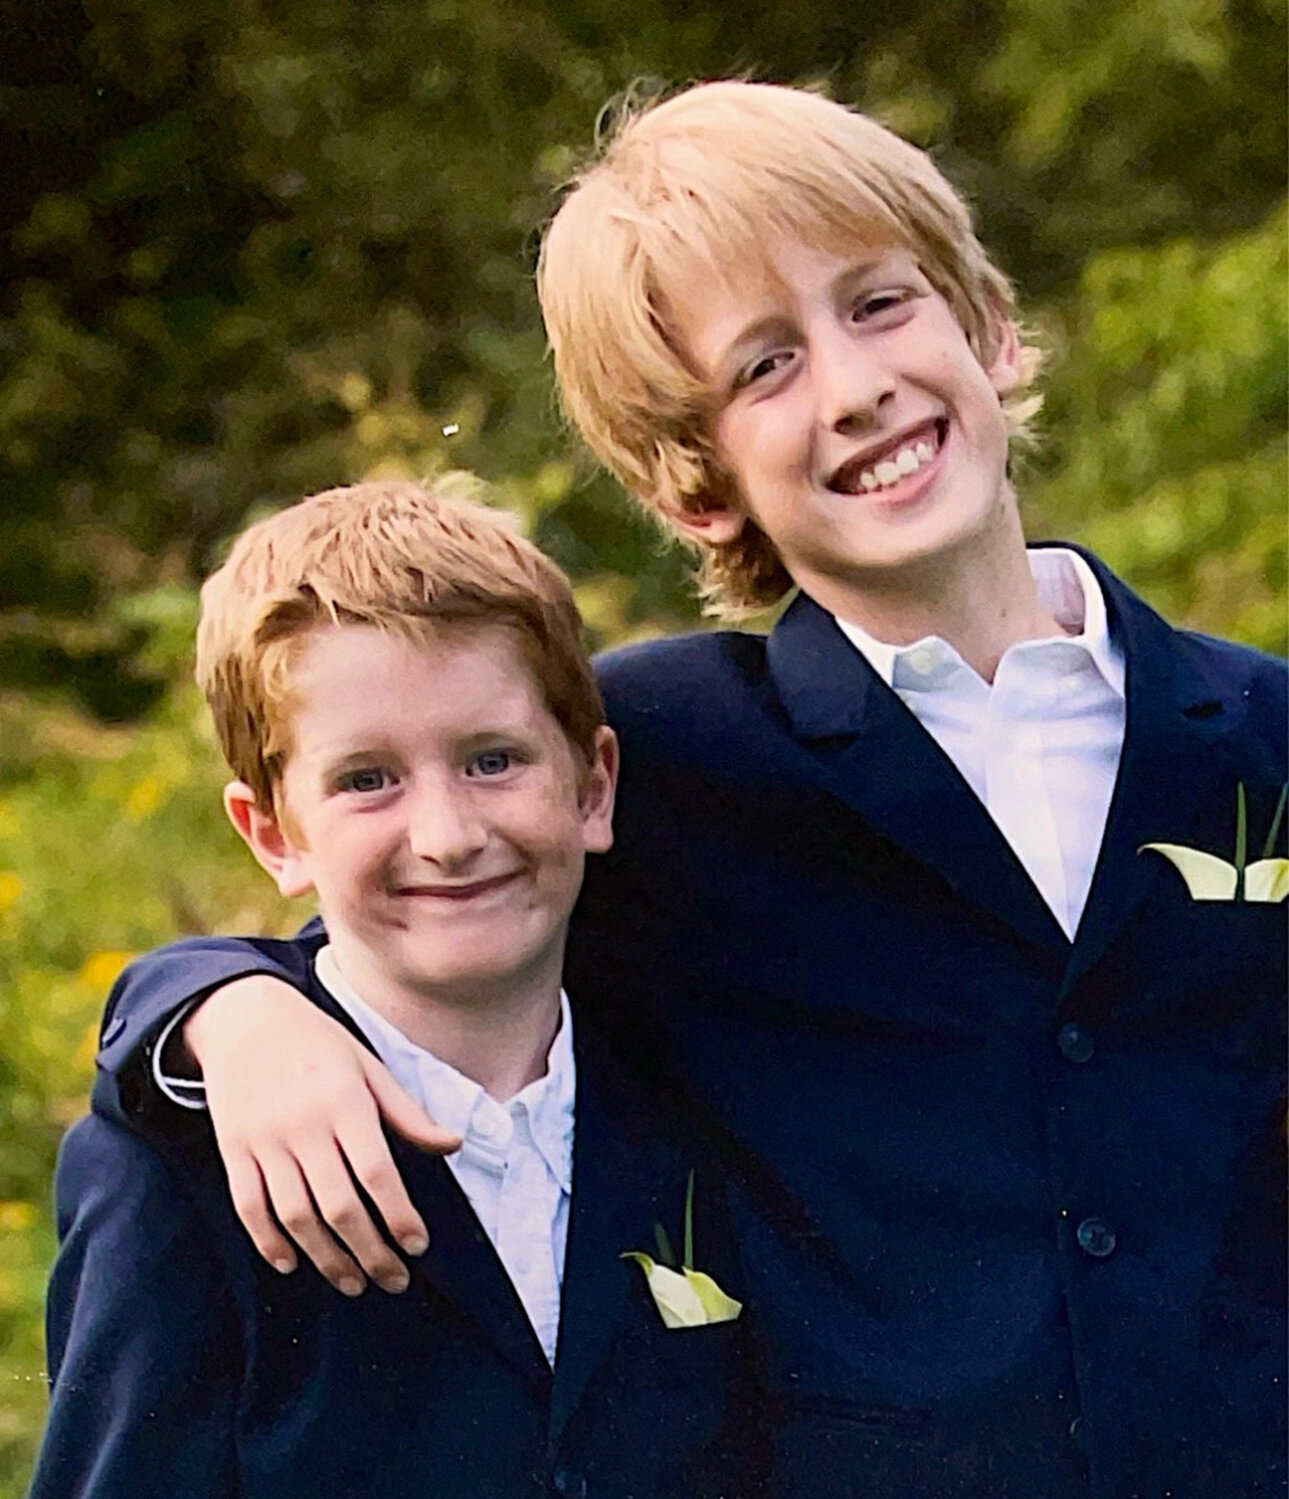 Brothers Kevin, left, and Jack O’Neill were always close. They had a love of playing video games and sports in common. As adults, they shared another bond — drug addiction.